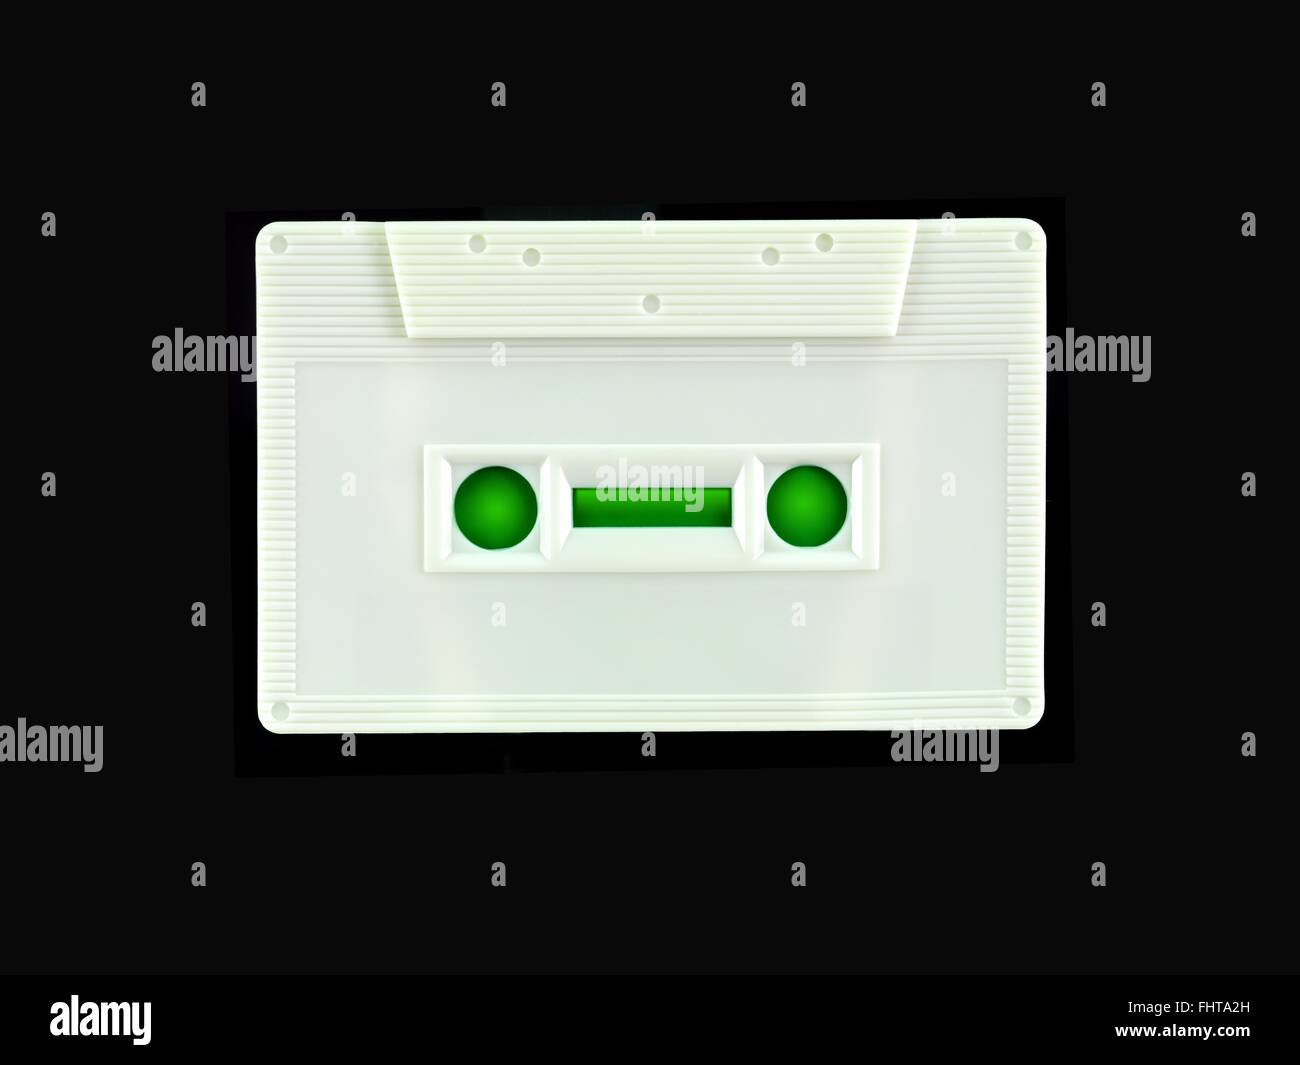 A image of an old audio tape cassette Stock Photo